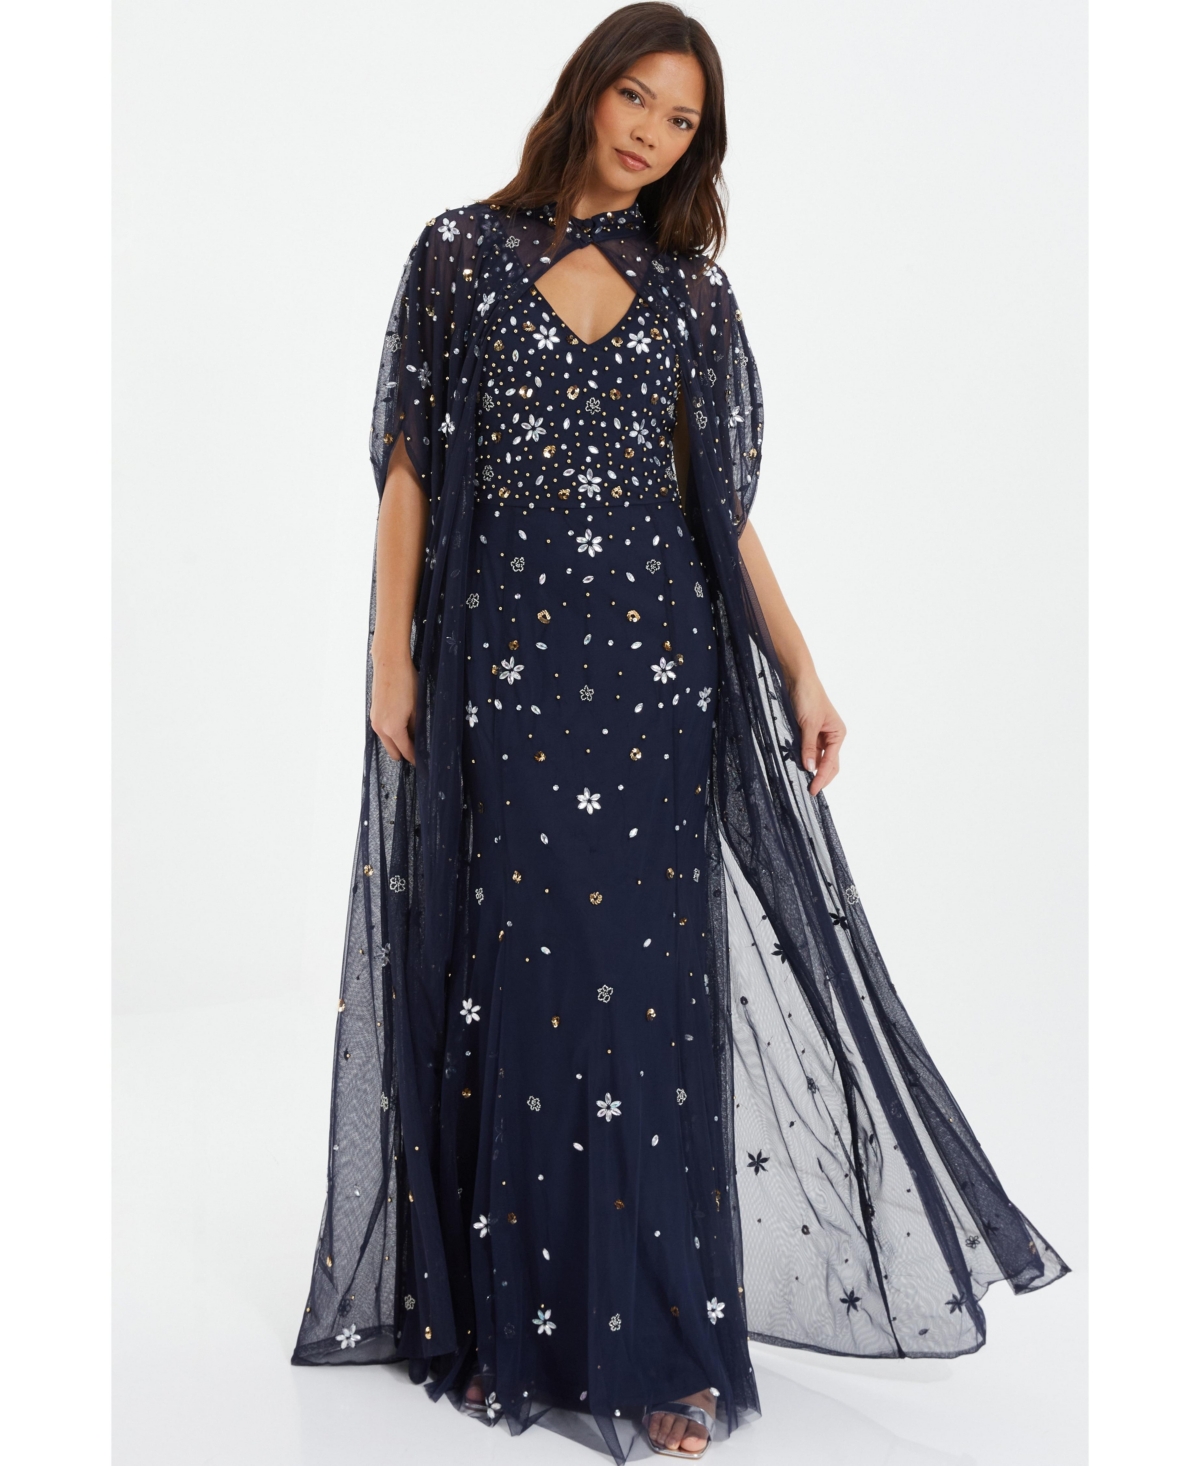 Women's Beaded 2-In-1 Cape And Evening Dress - Blue